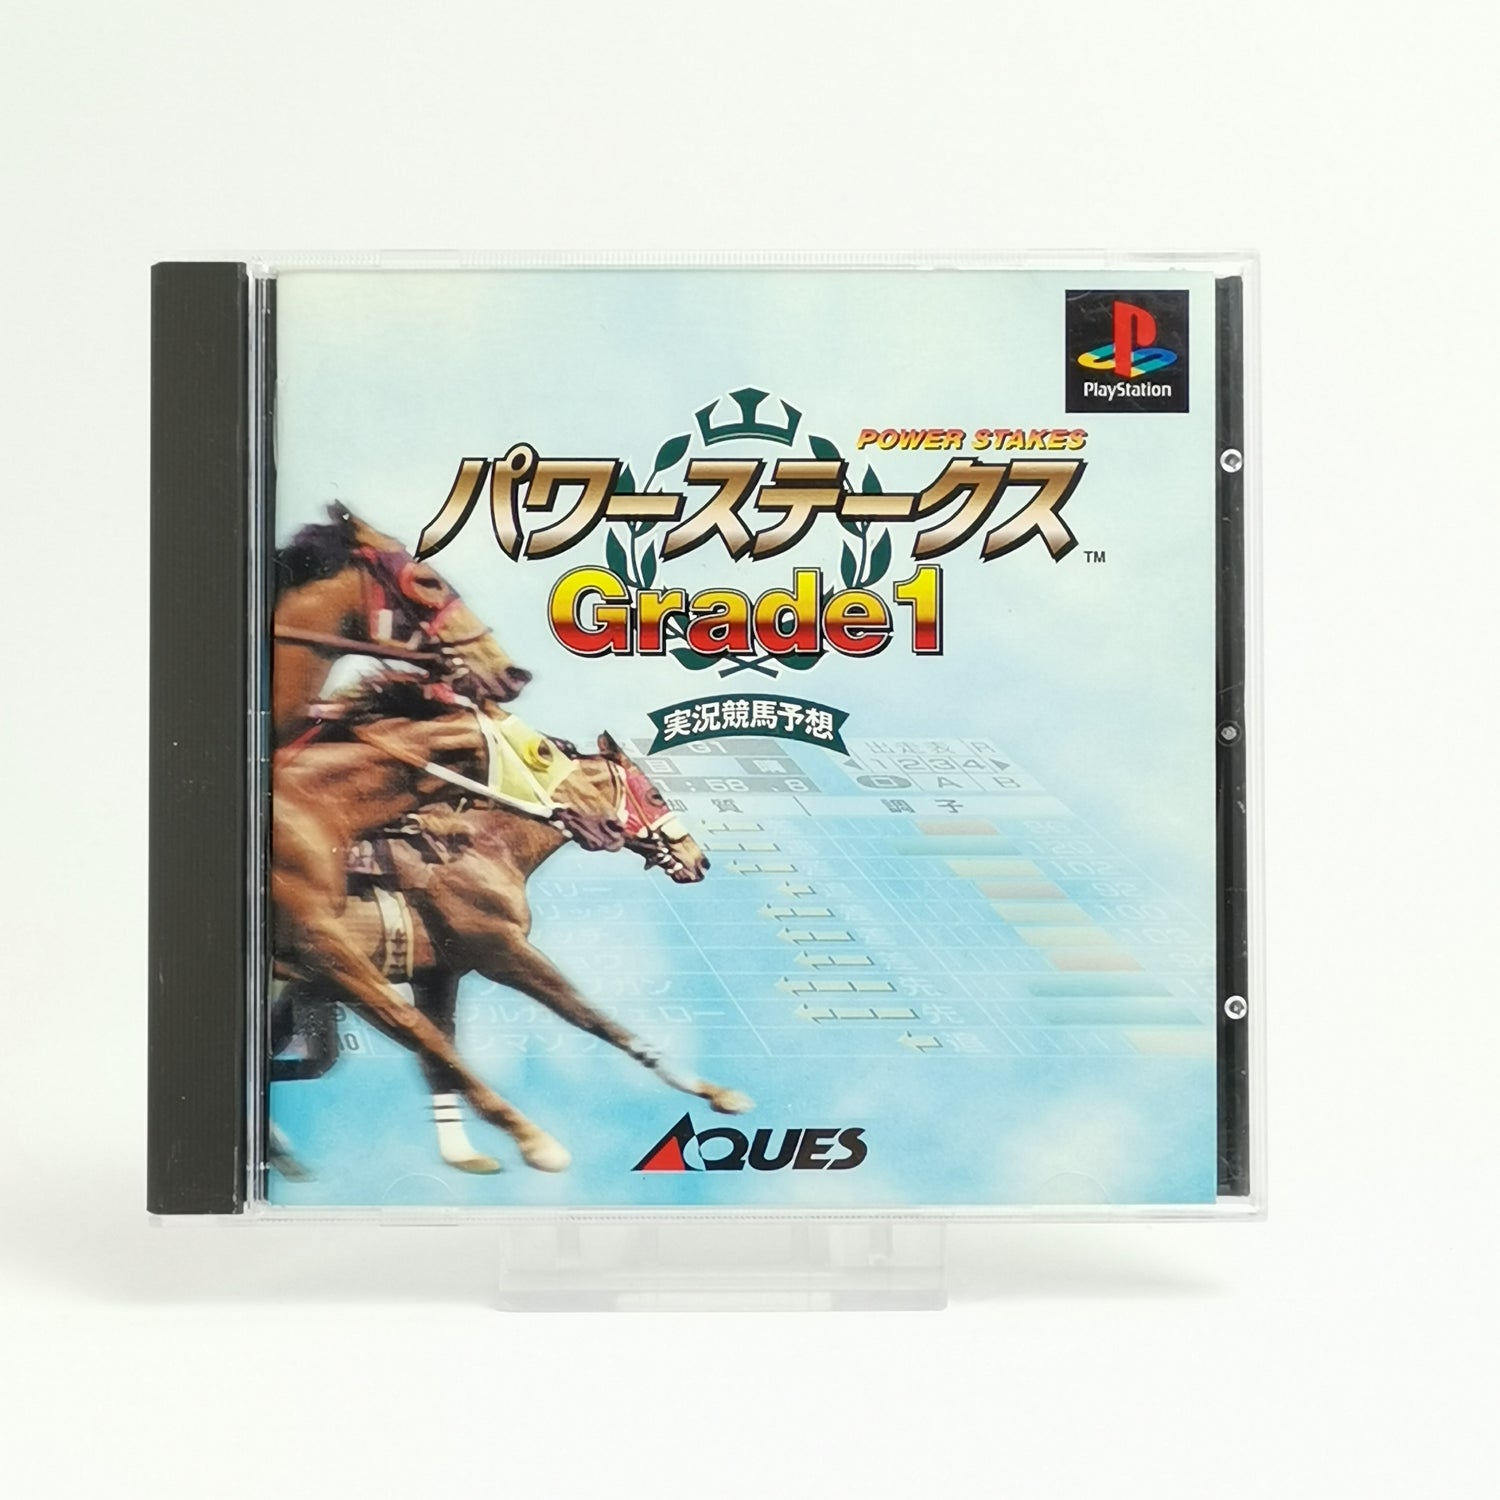 Sony Playstation 1 Game : Power Stakes Grade 1 | PS1 PSX - OVP NTSC-J Japan